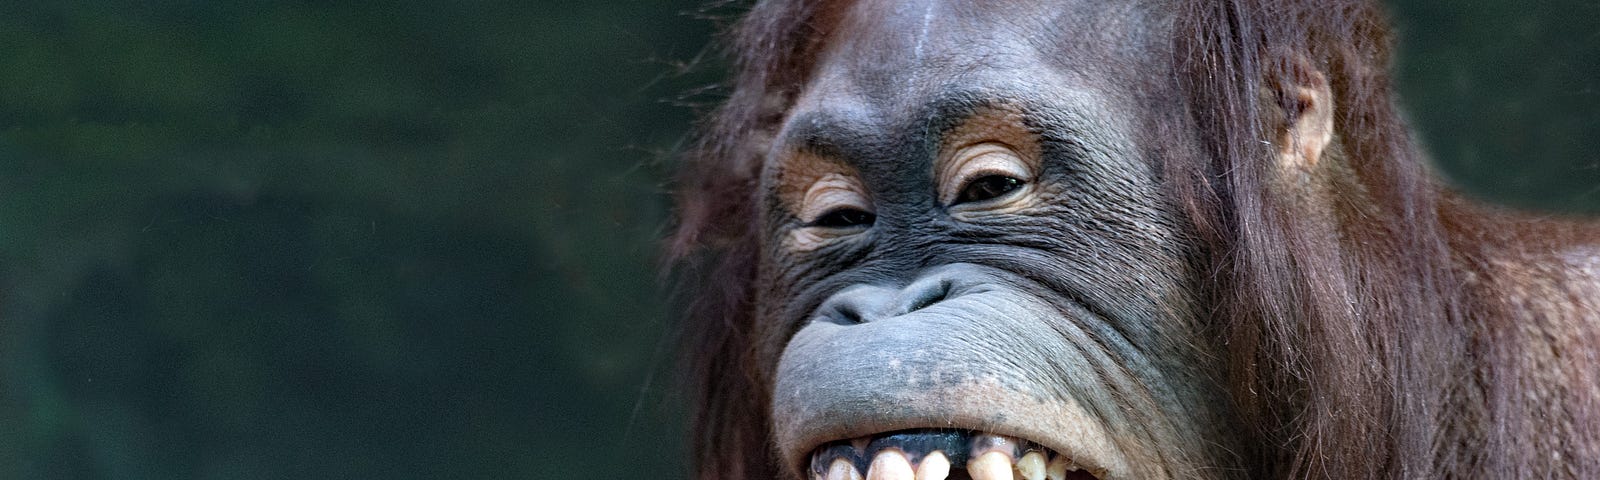 An orangutan with it’s mouth open wide, appearing to laugh.